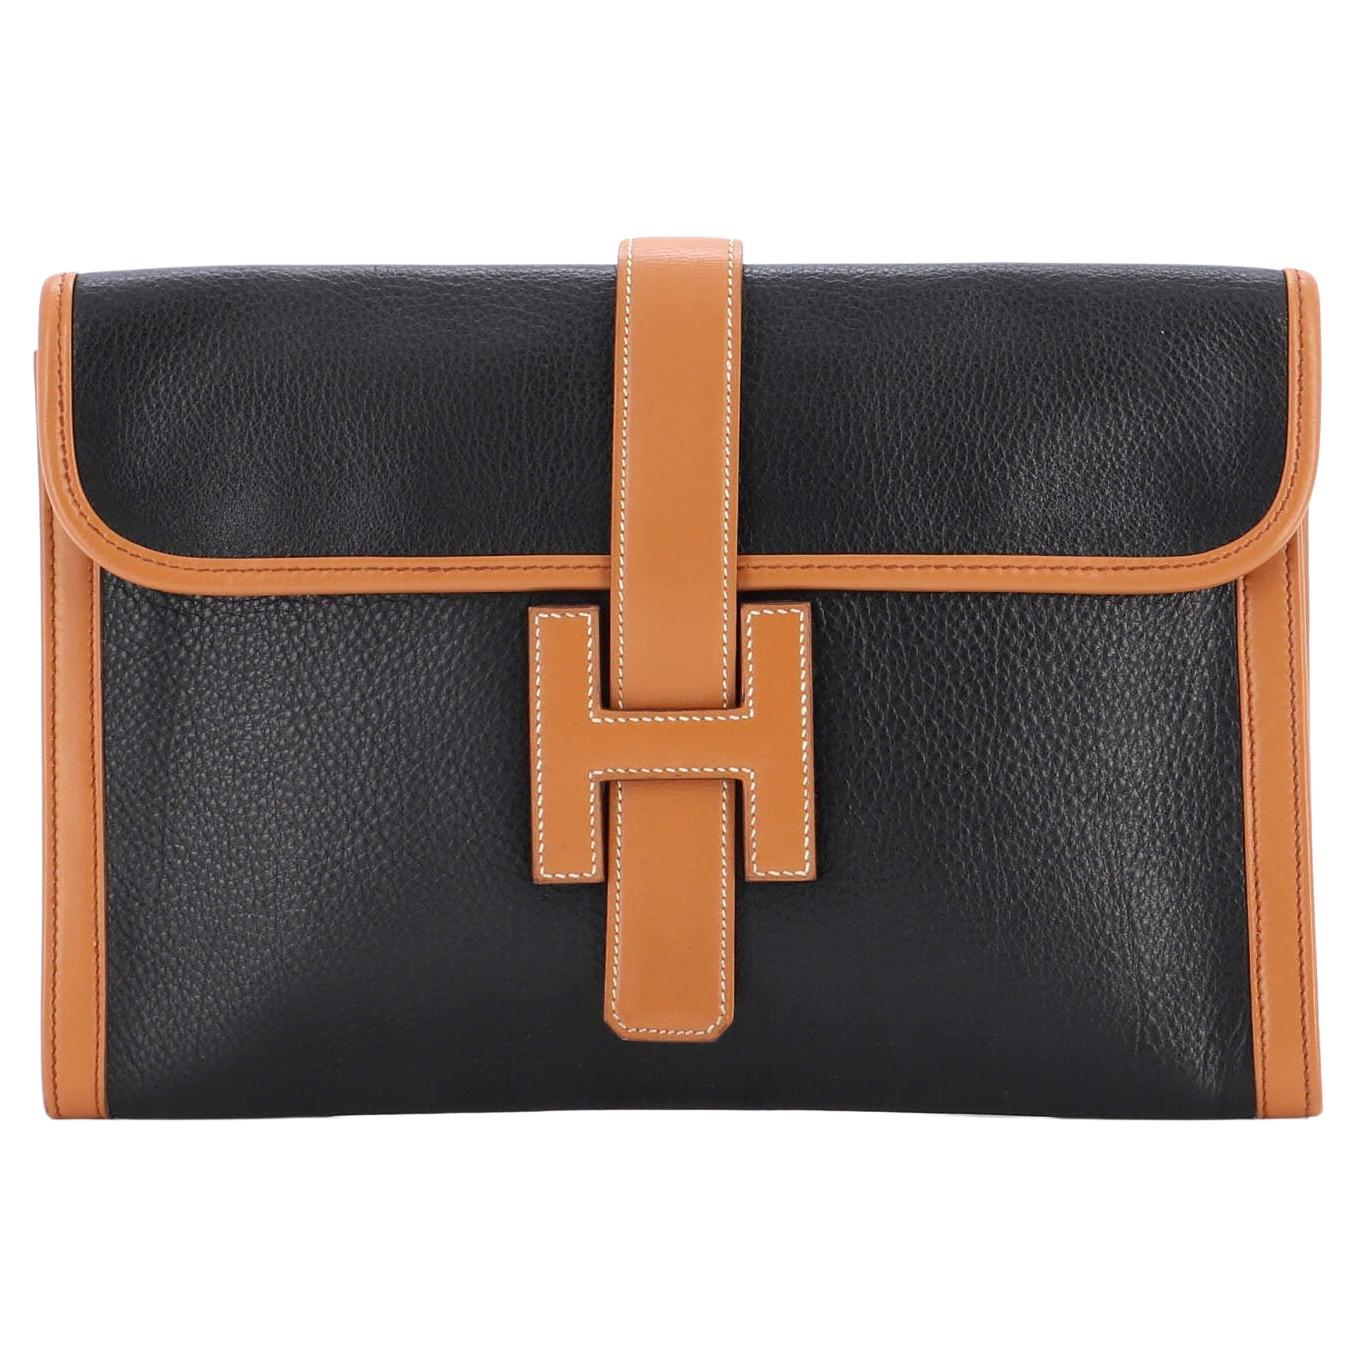 hermes jige clutch outfit